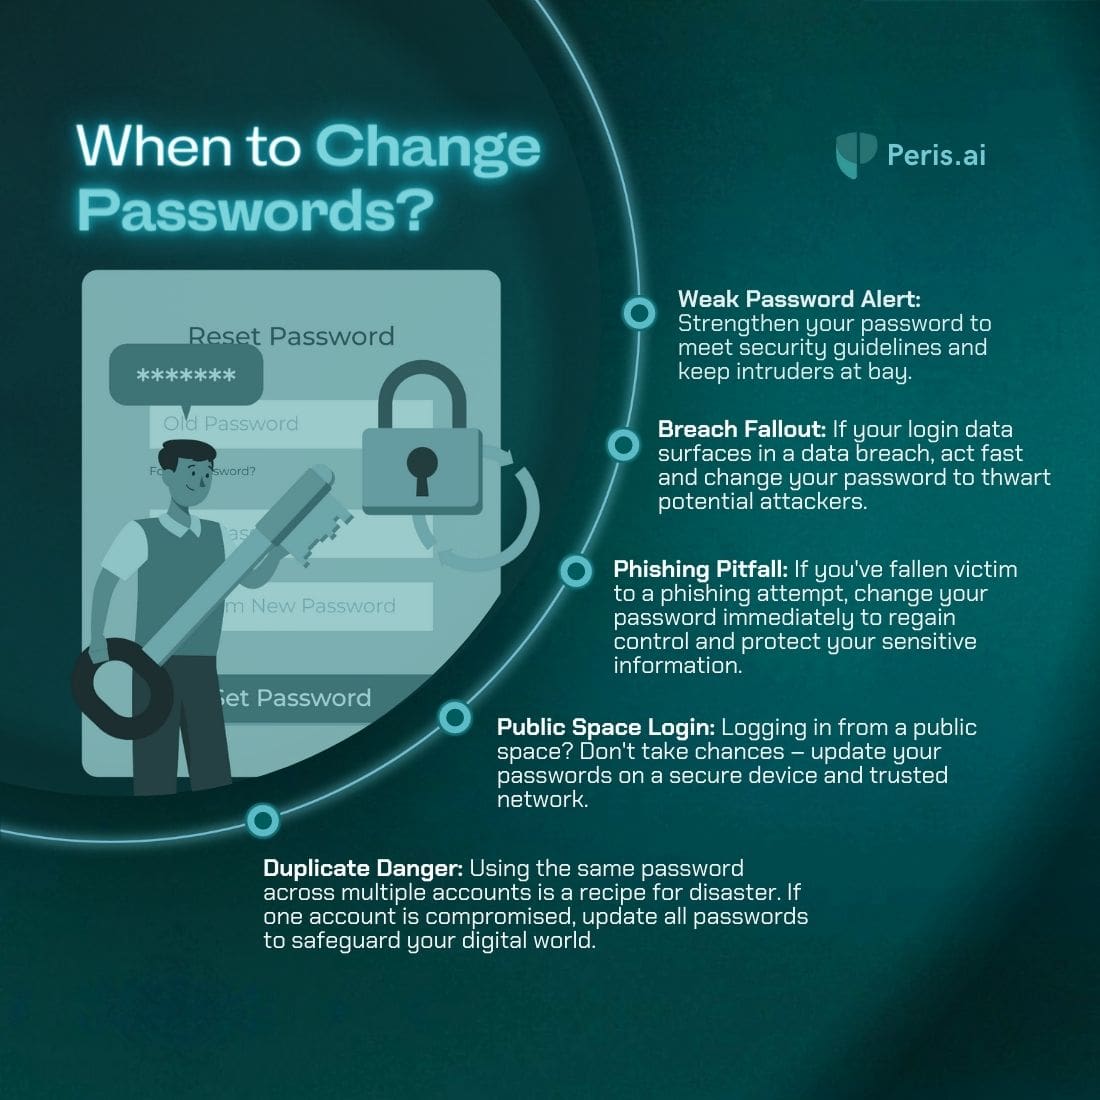 Your password is your first line of defense. Stay one step ahead by knowing when it's time to update.

Stay proactive, stay protected!

#PasswordSecurity #StaySafeOnline #SecureYourAccounts #CyberDefense #PasswordStrength #DataBreachResponse #PhishingAwareness #PublicWiFiSafety